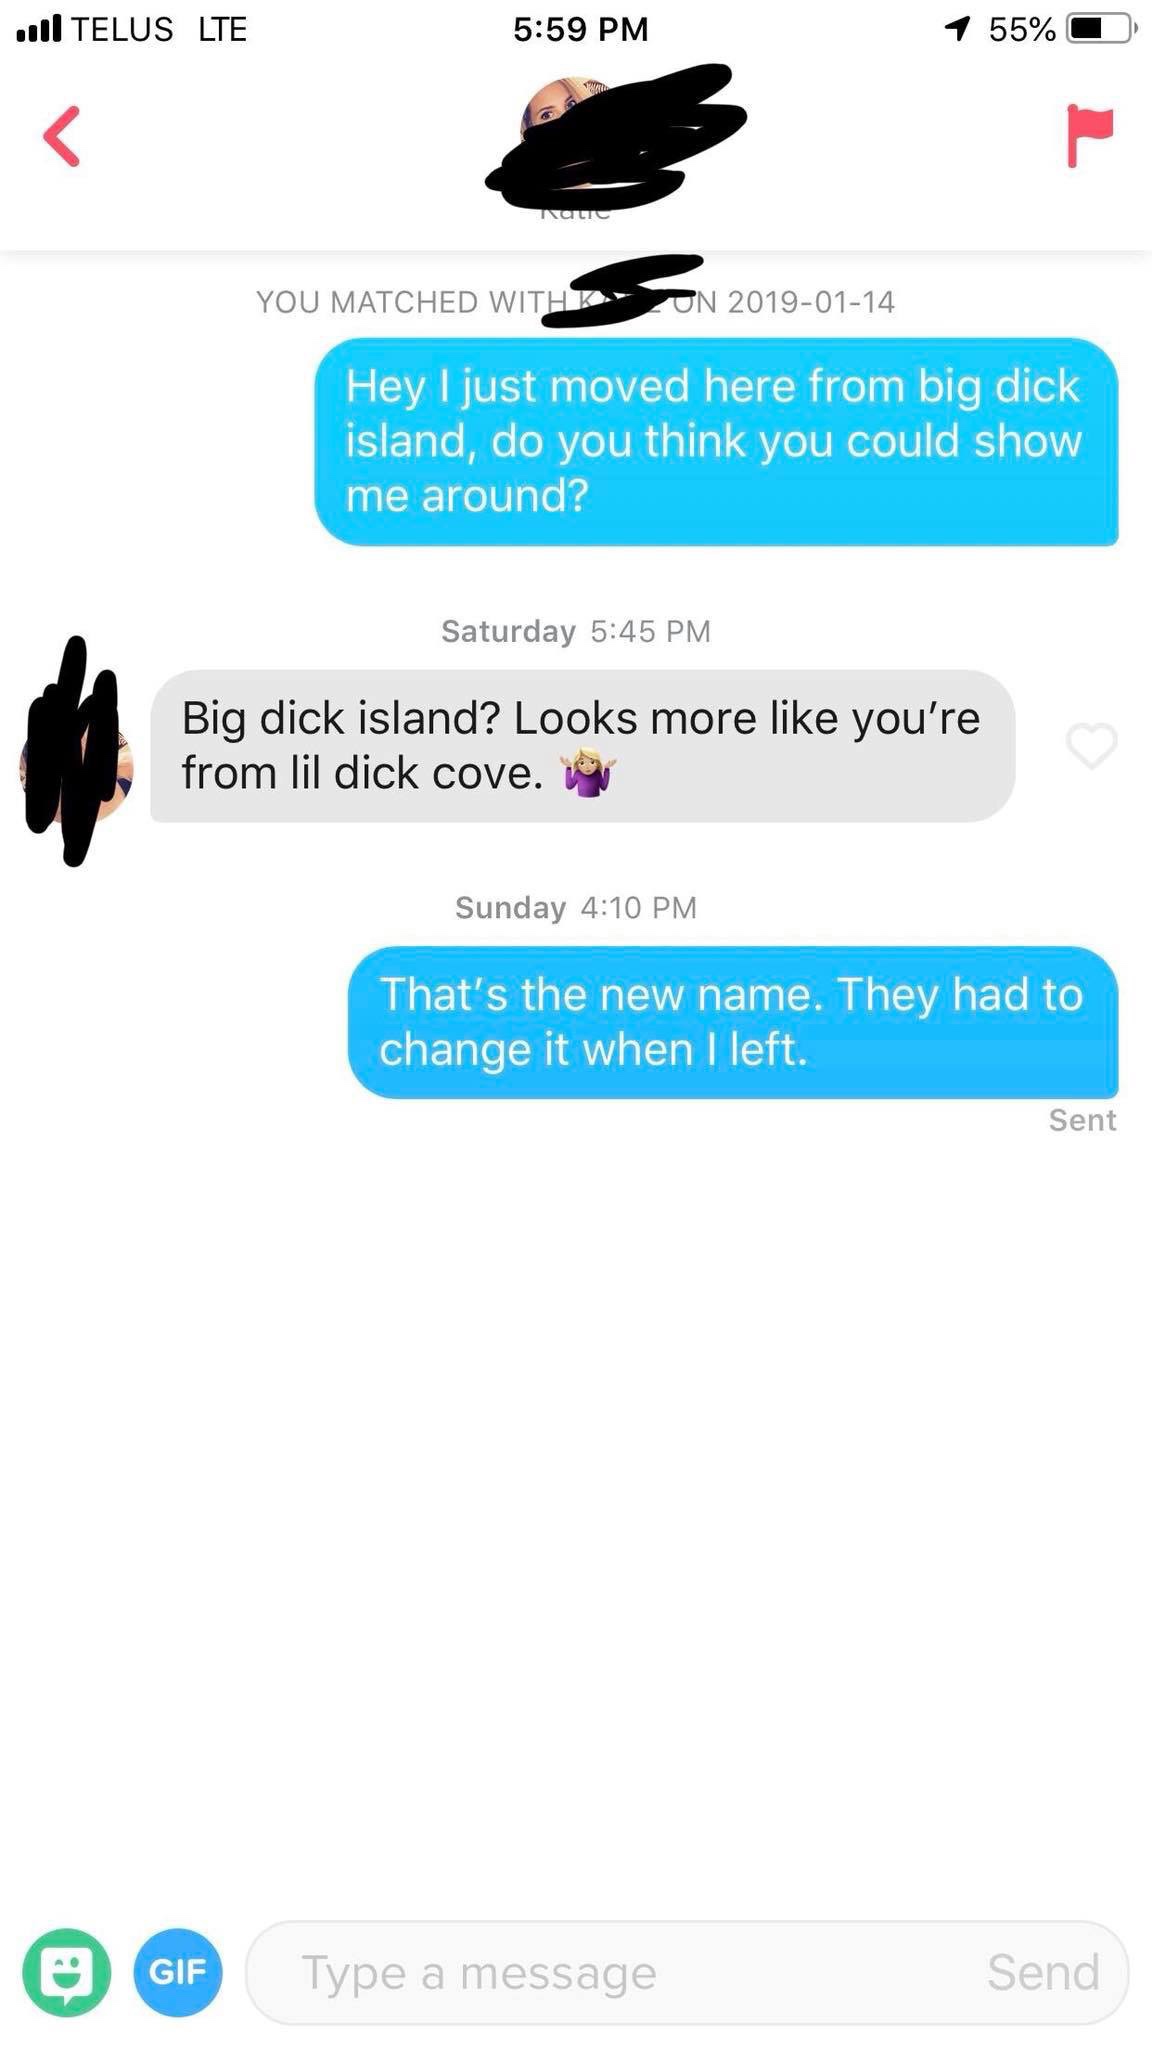 tinder - interactions funny meme - I Telus Lte 1 55% O Nu You Matched With Zon Hey I just moved here from big dick island, do you think you could show me around? Saturday Big dick island? Looks more you're from lil dick cove. Sunday That's the new name. T